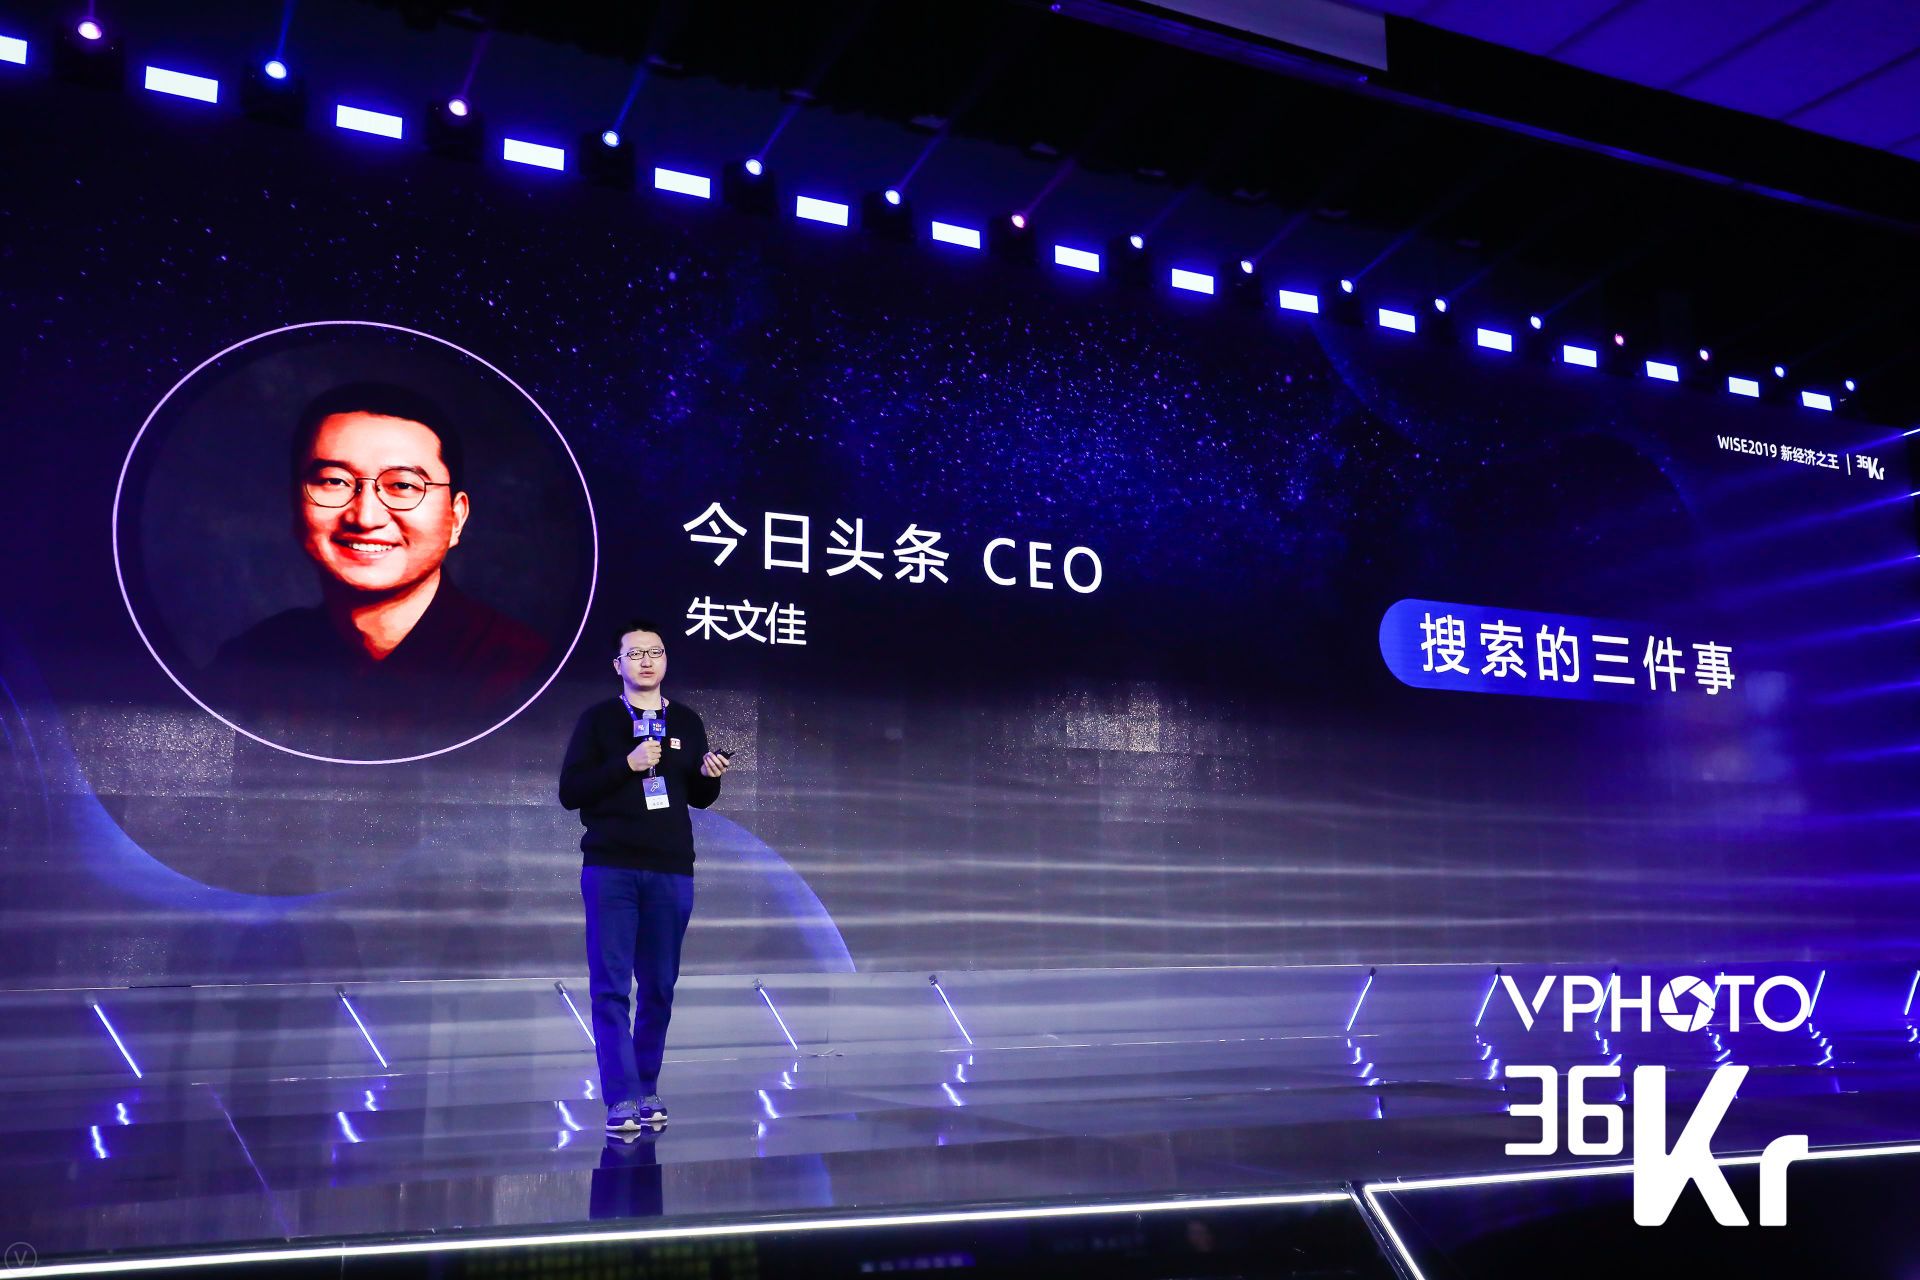 ByteDance’s Toutiao on mission to build next generation’s search engine | WISE New Economy Conference 2019